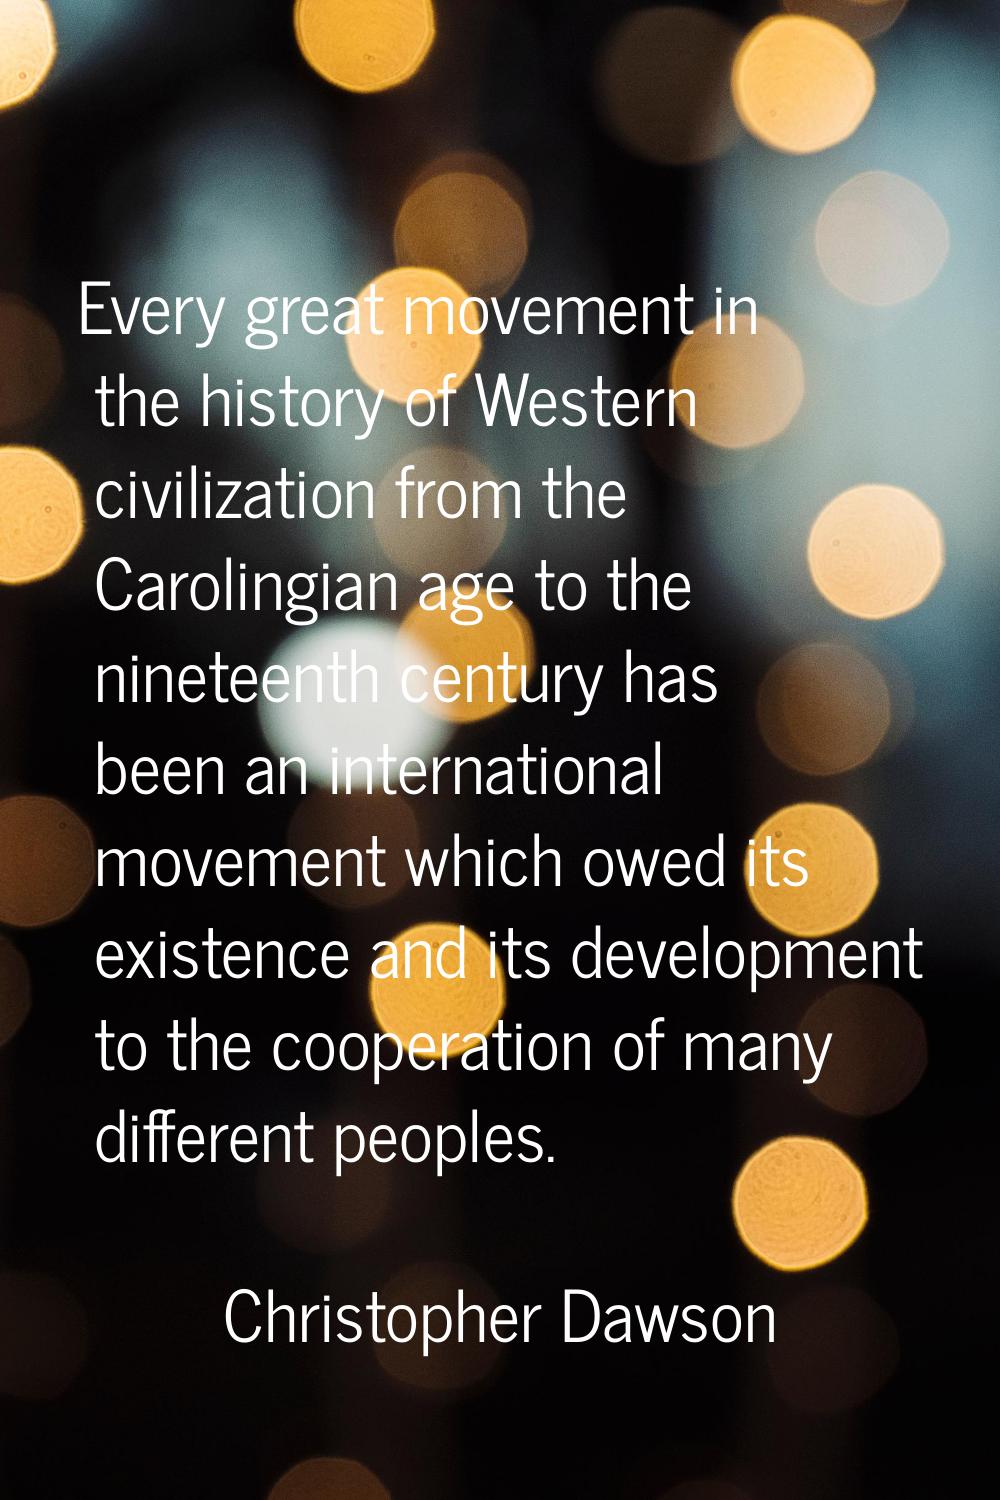 Every great movement in the history of Western civilization from the Carolingian age to the ninetee